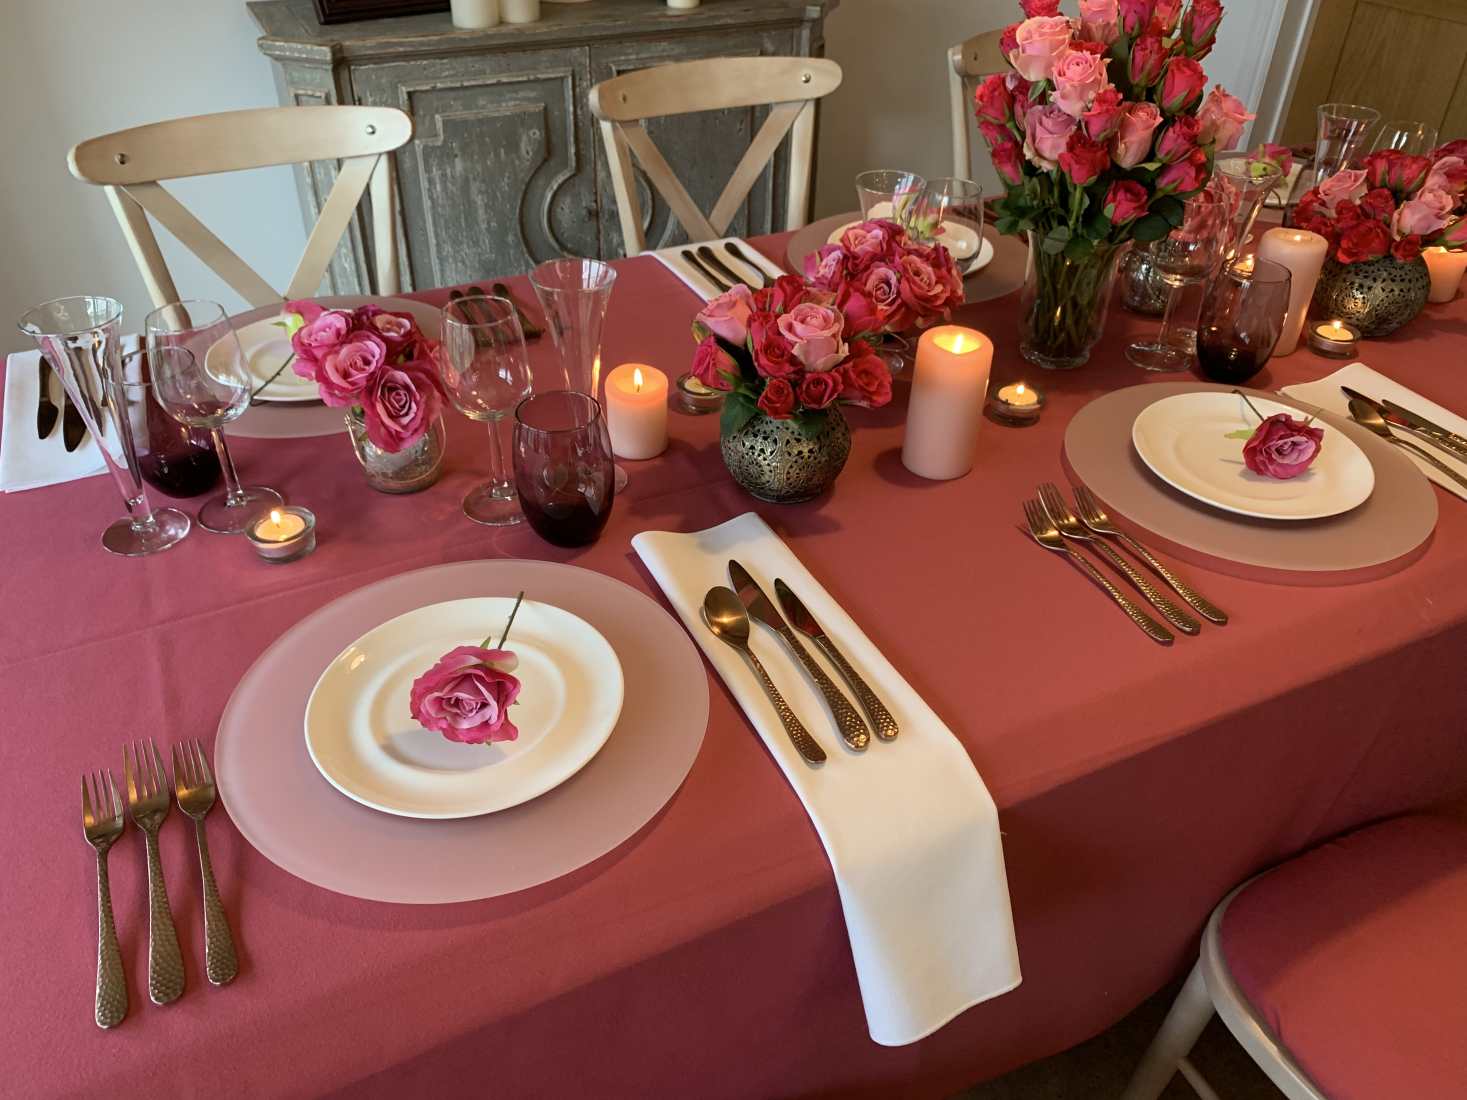 A beautifully laid wedding table with chairs, table linen, flowers and glasses in Viva Magenta wedding colour trend with white and other accents.